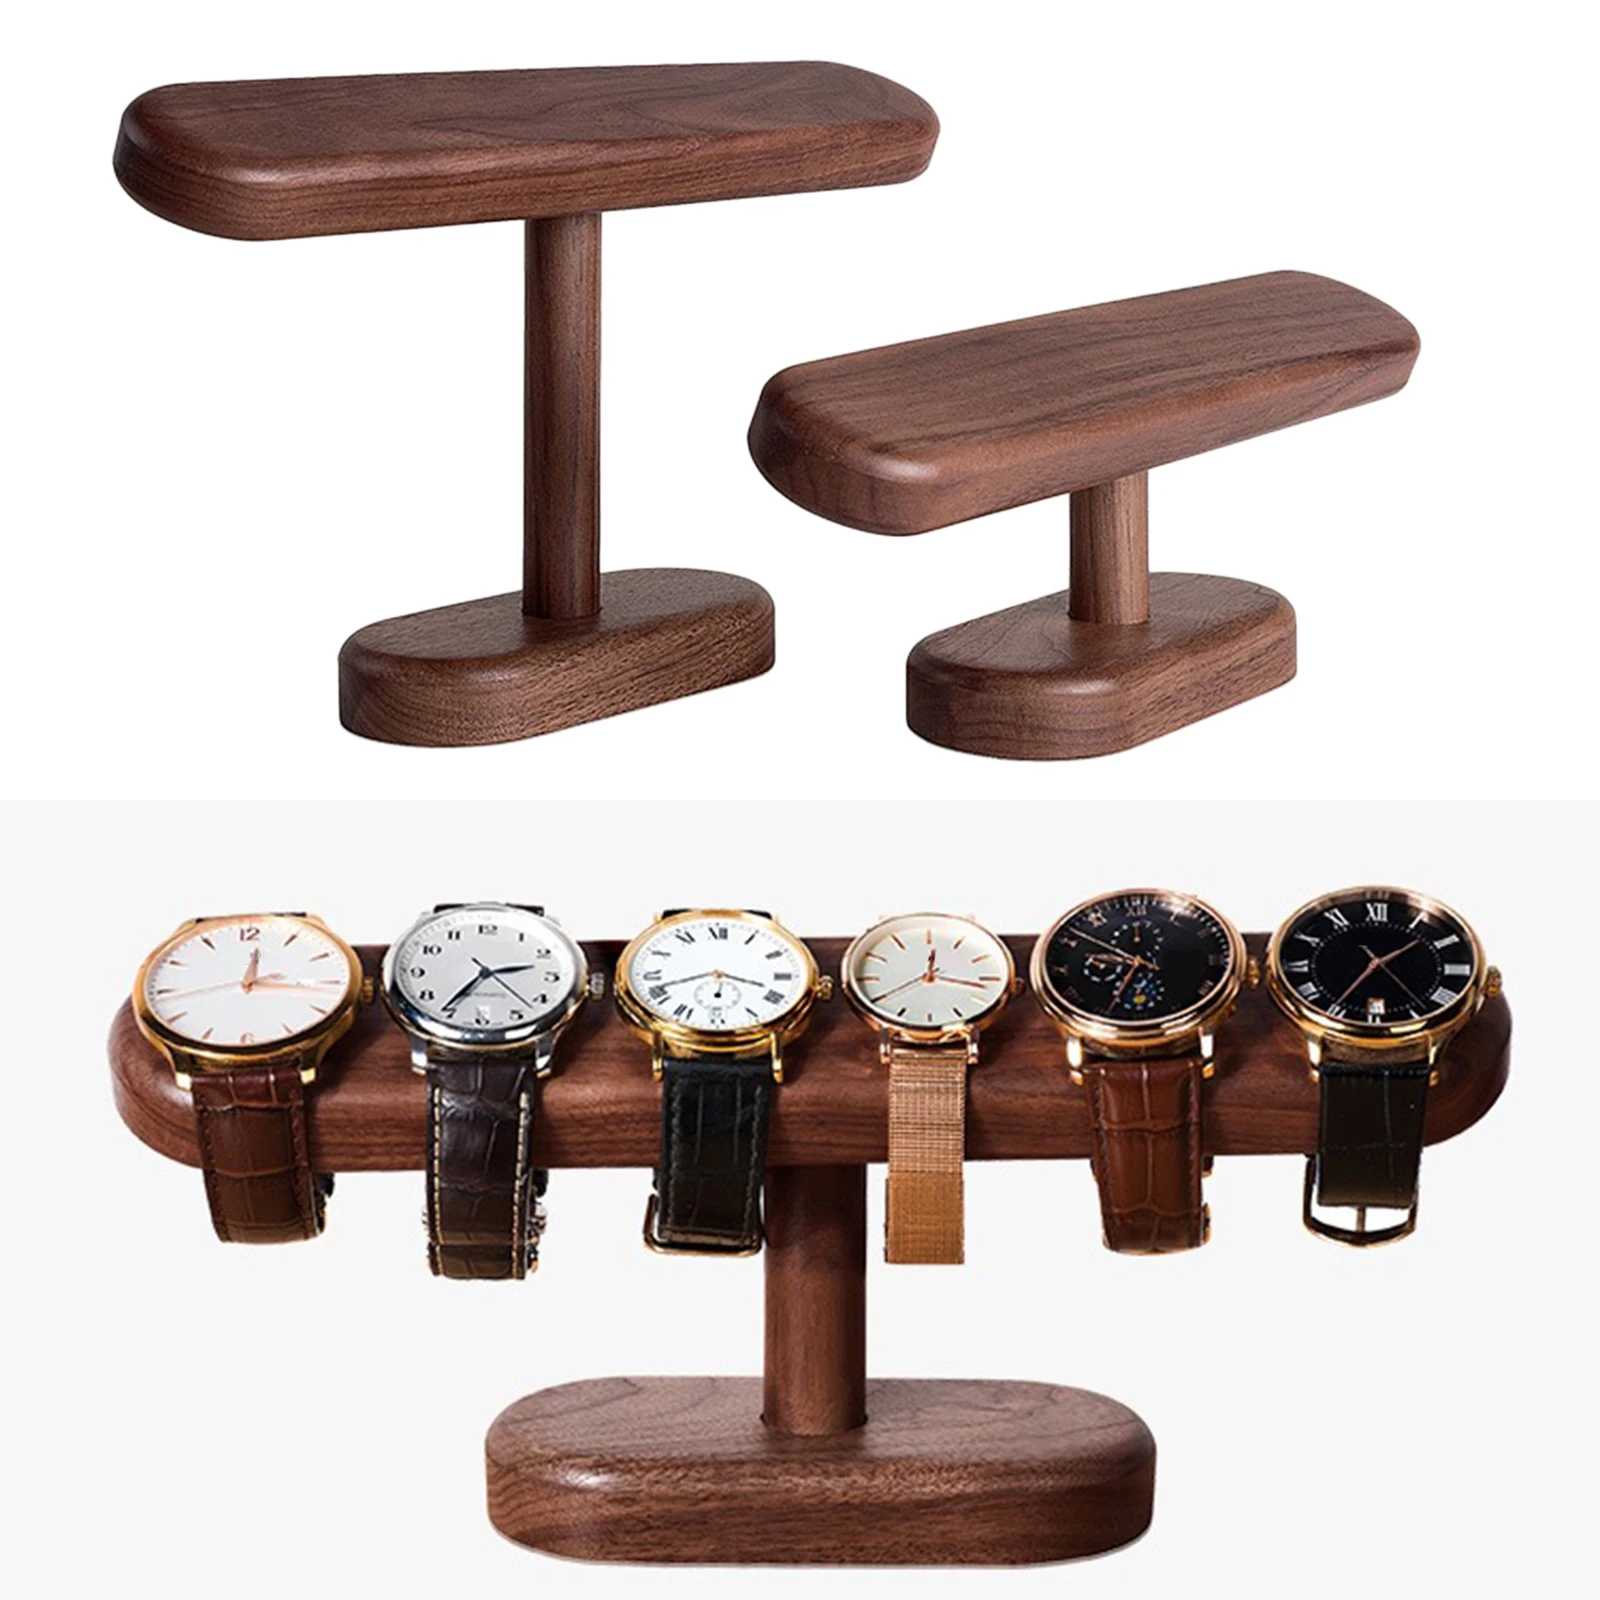 Wooden Jewelry Display Perfect for Bracelet Bangle Watch Home Organization